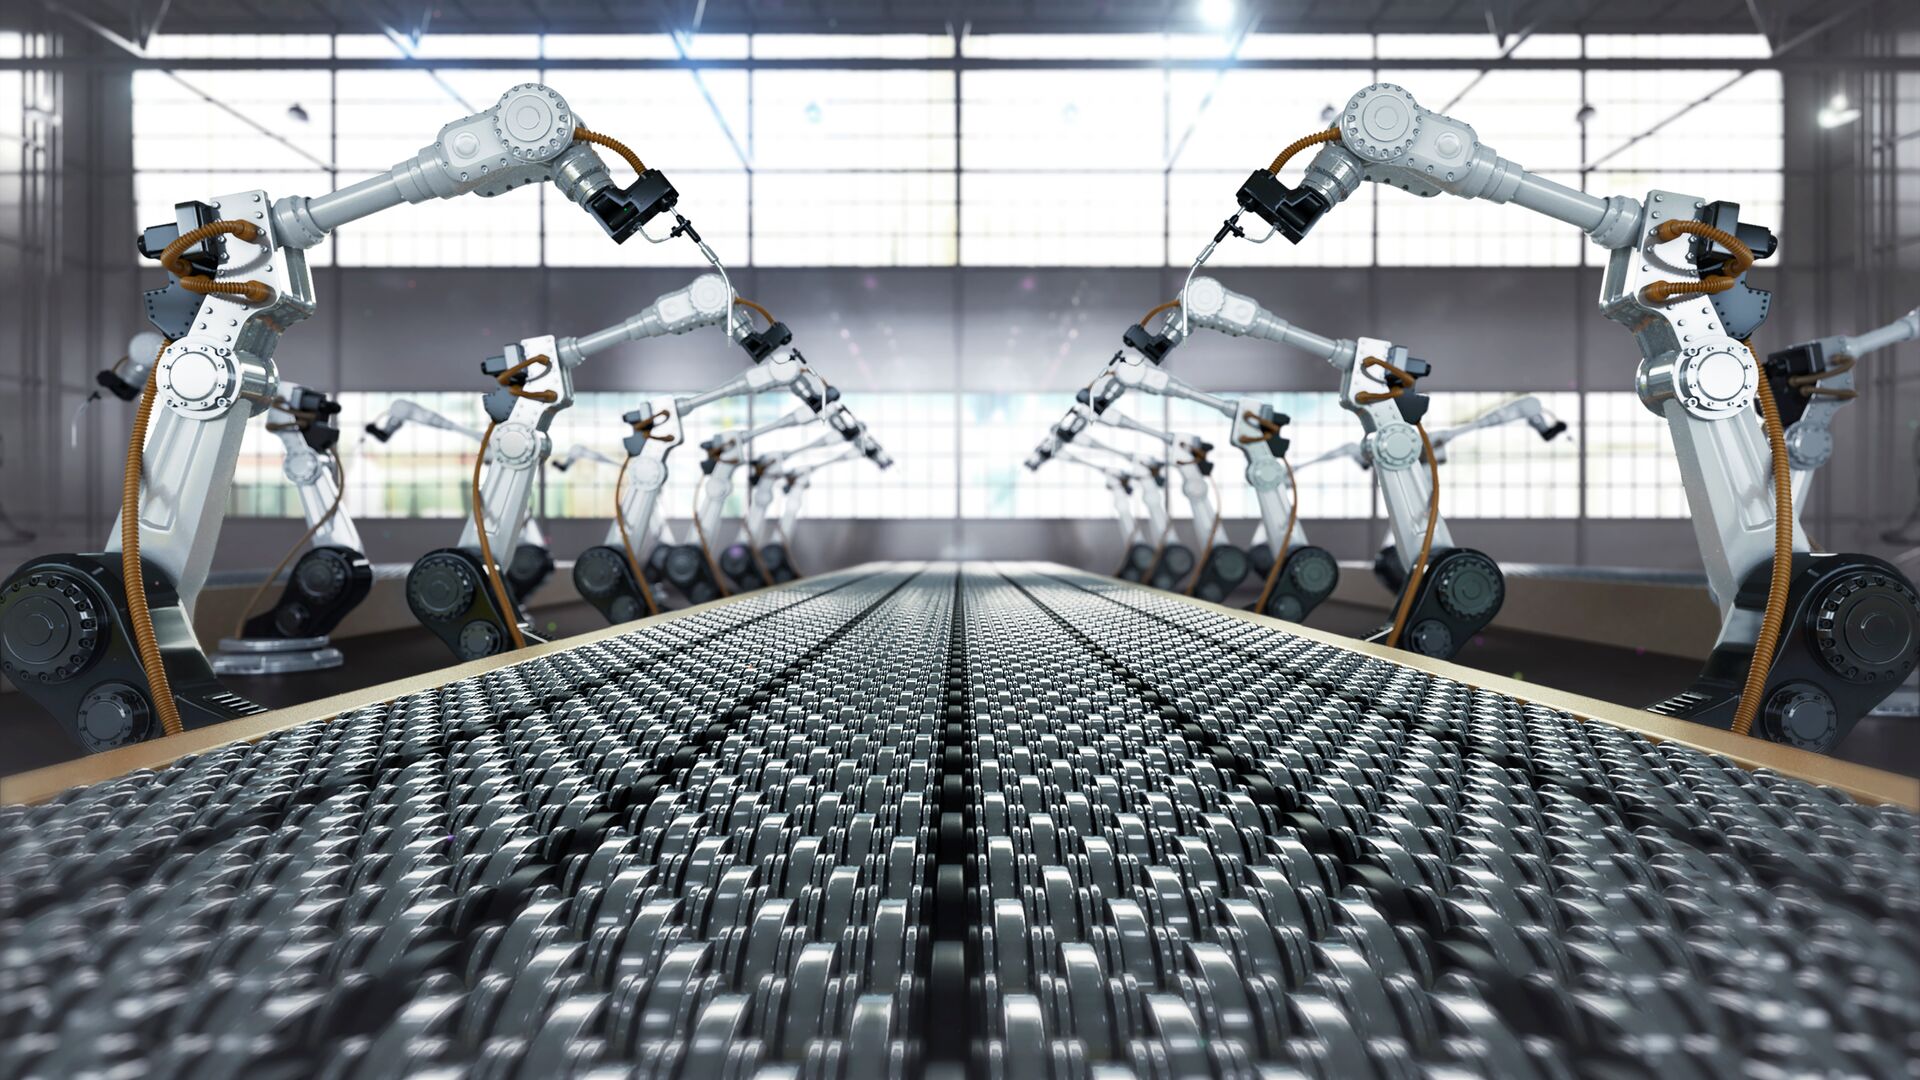 Robotics arms in a manufacturing line.